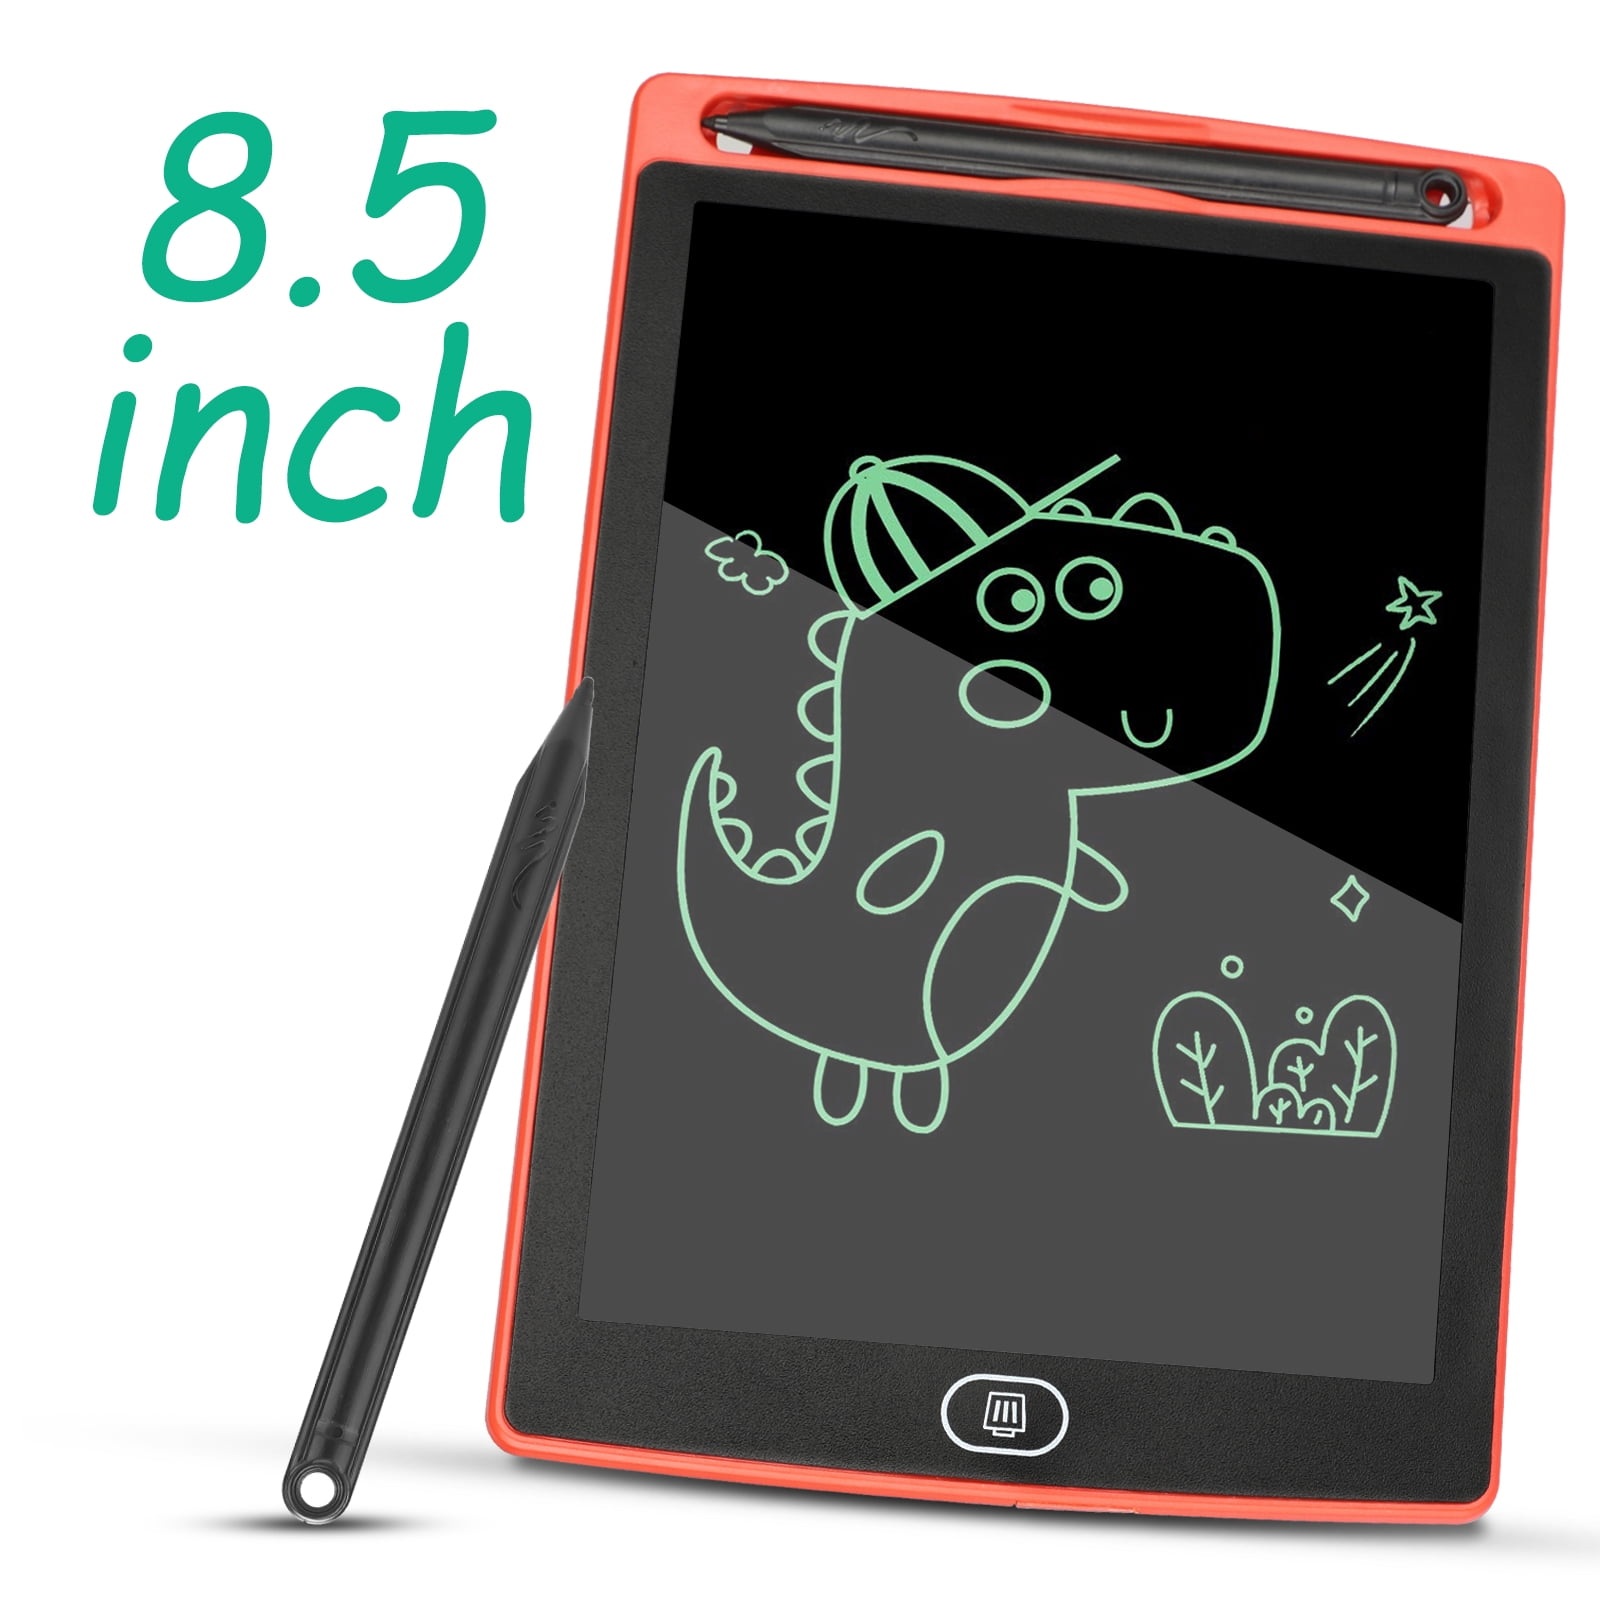 8.5 inch LCD Electric Writing Pad Tablet Magic Sketch Drawing Pad To Draw,  Sketch, Create, Art